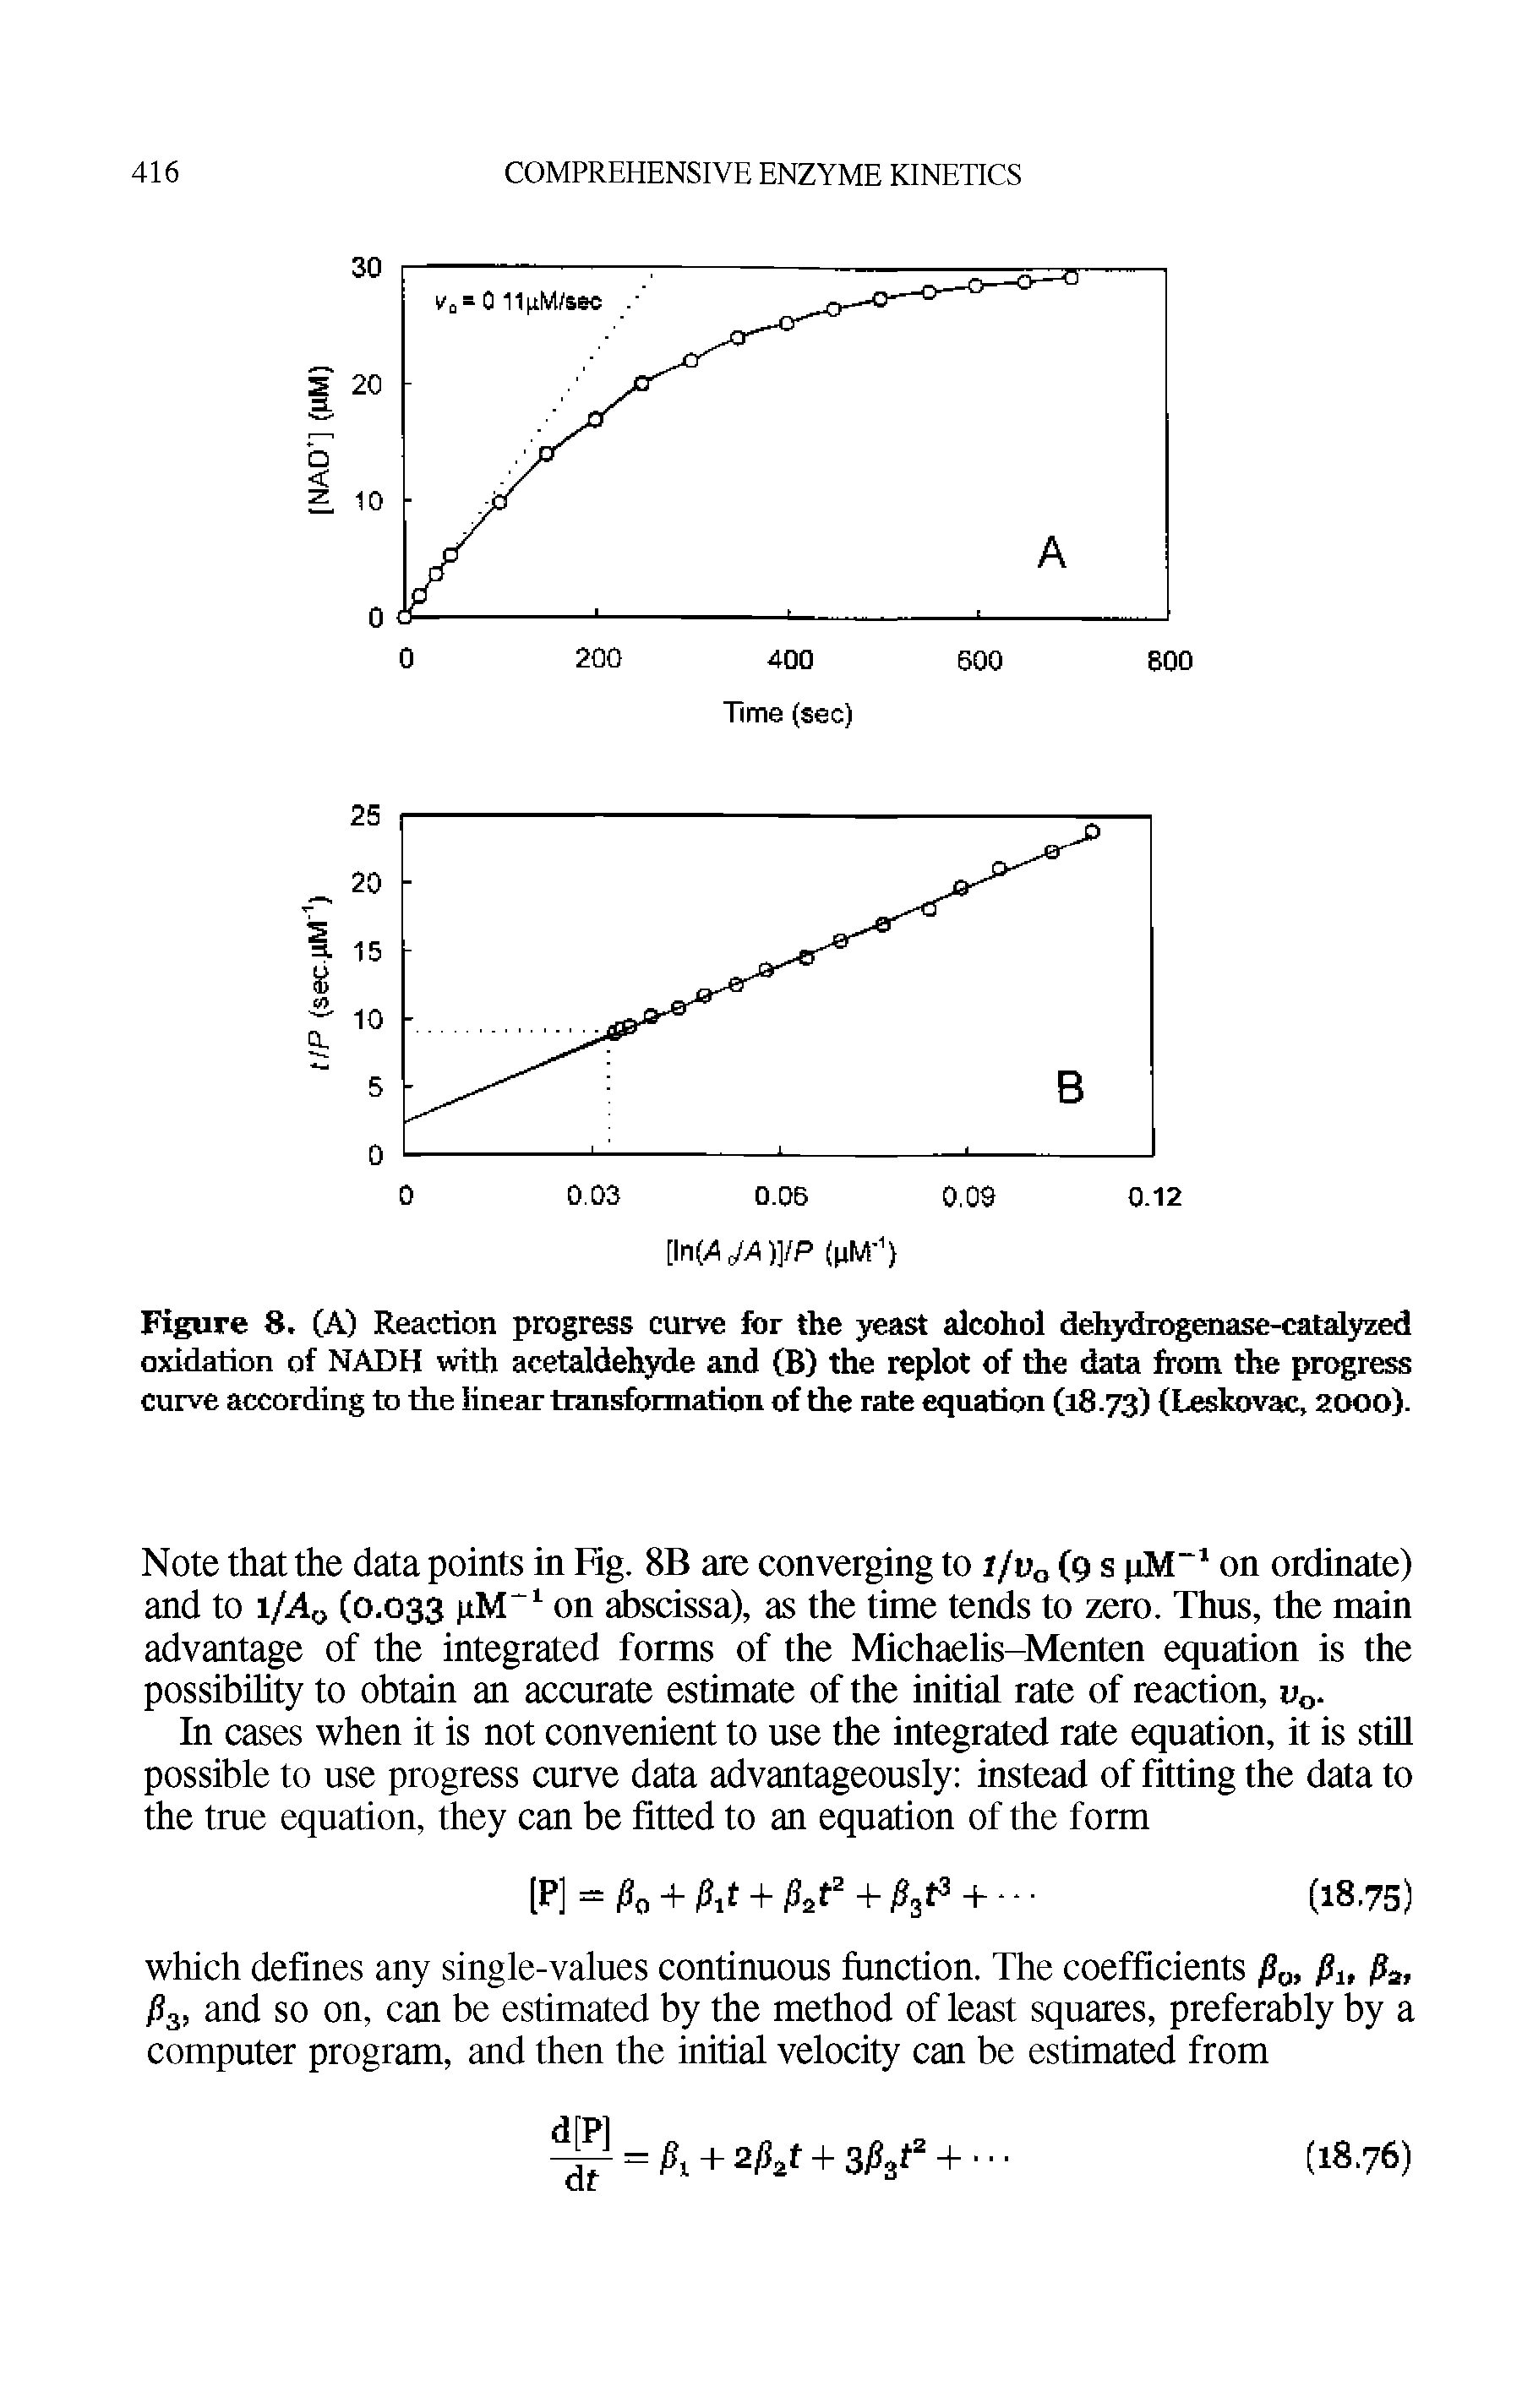 Figure 8. (A) Reaction progress curve for the yeast alcohol dehydrogenase-catalyzed oxidation of NADH with acetaldehyde and (B) the replot of the data from the progress curve according to the linear transformation of the rate equation (18.73) (Leskovac, 2000).